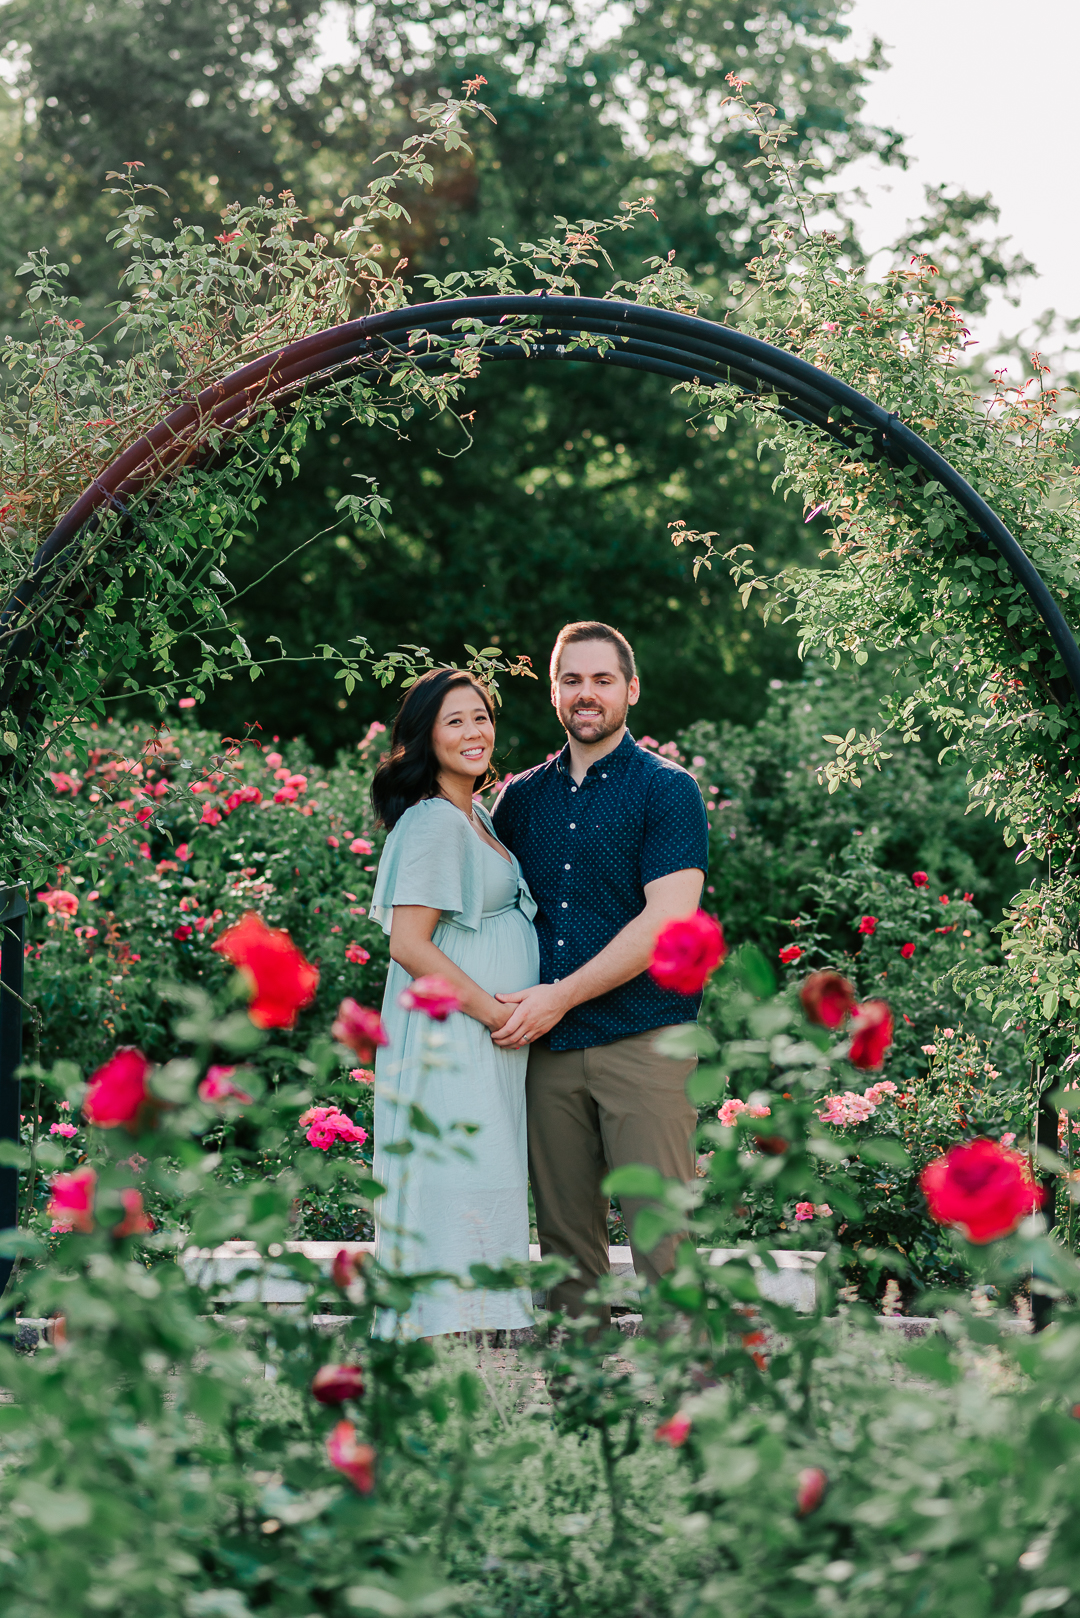 A mom to be in a blue dress stands in a rose garden under a large arch while hugging onto her partner the physician midwife collaborative practice